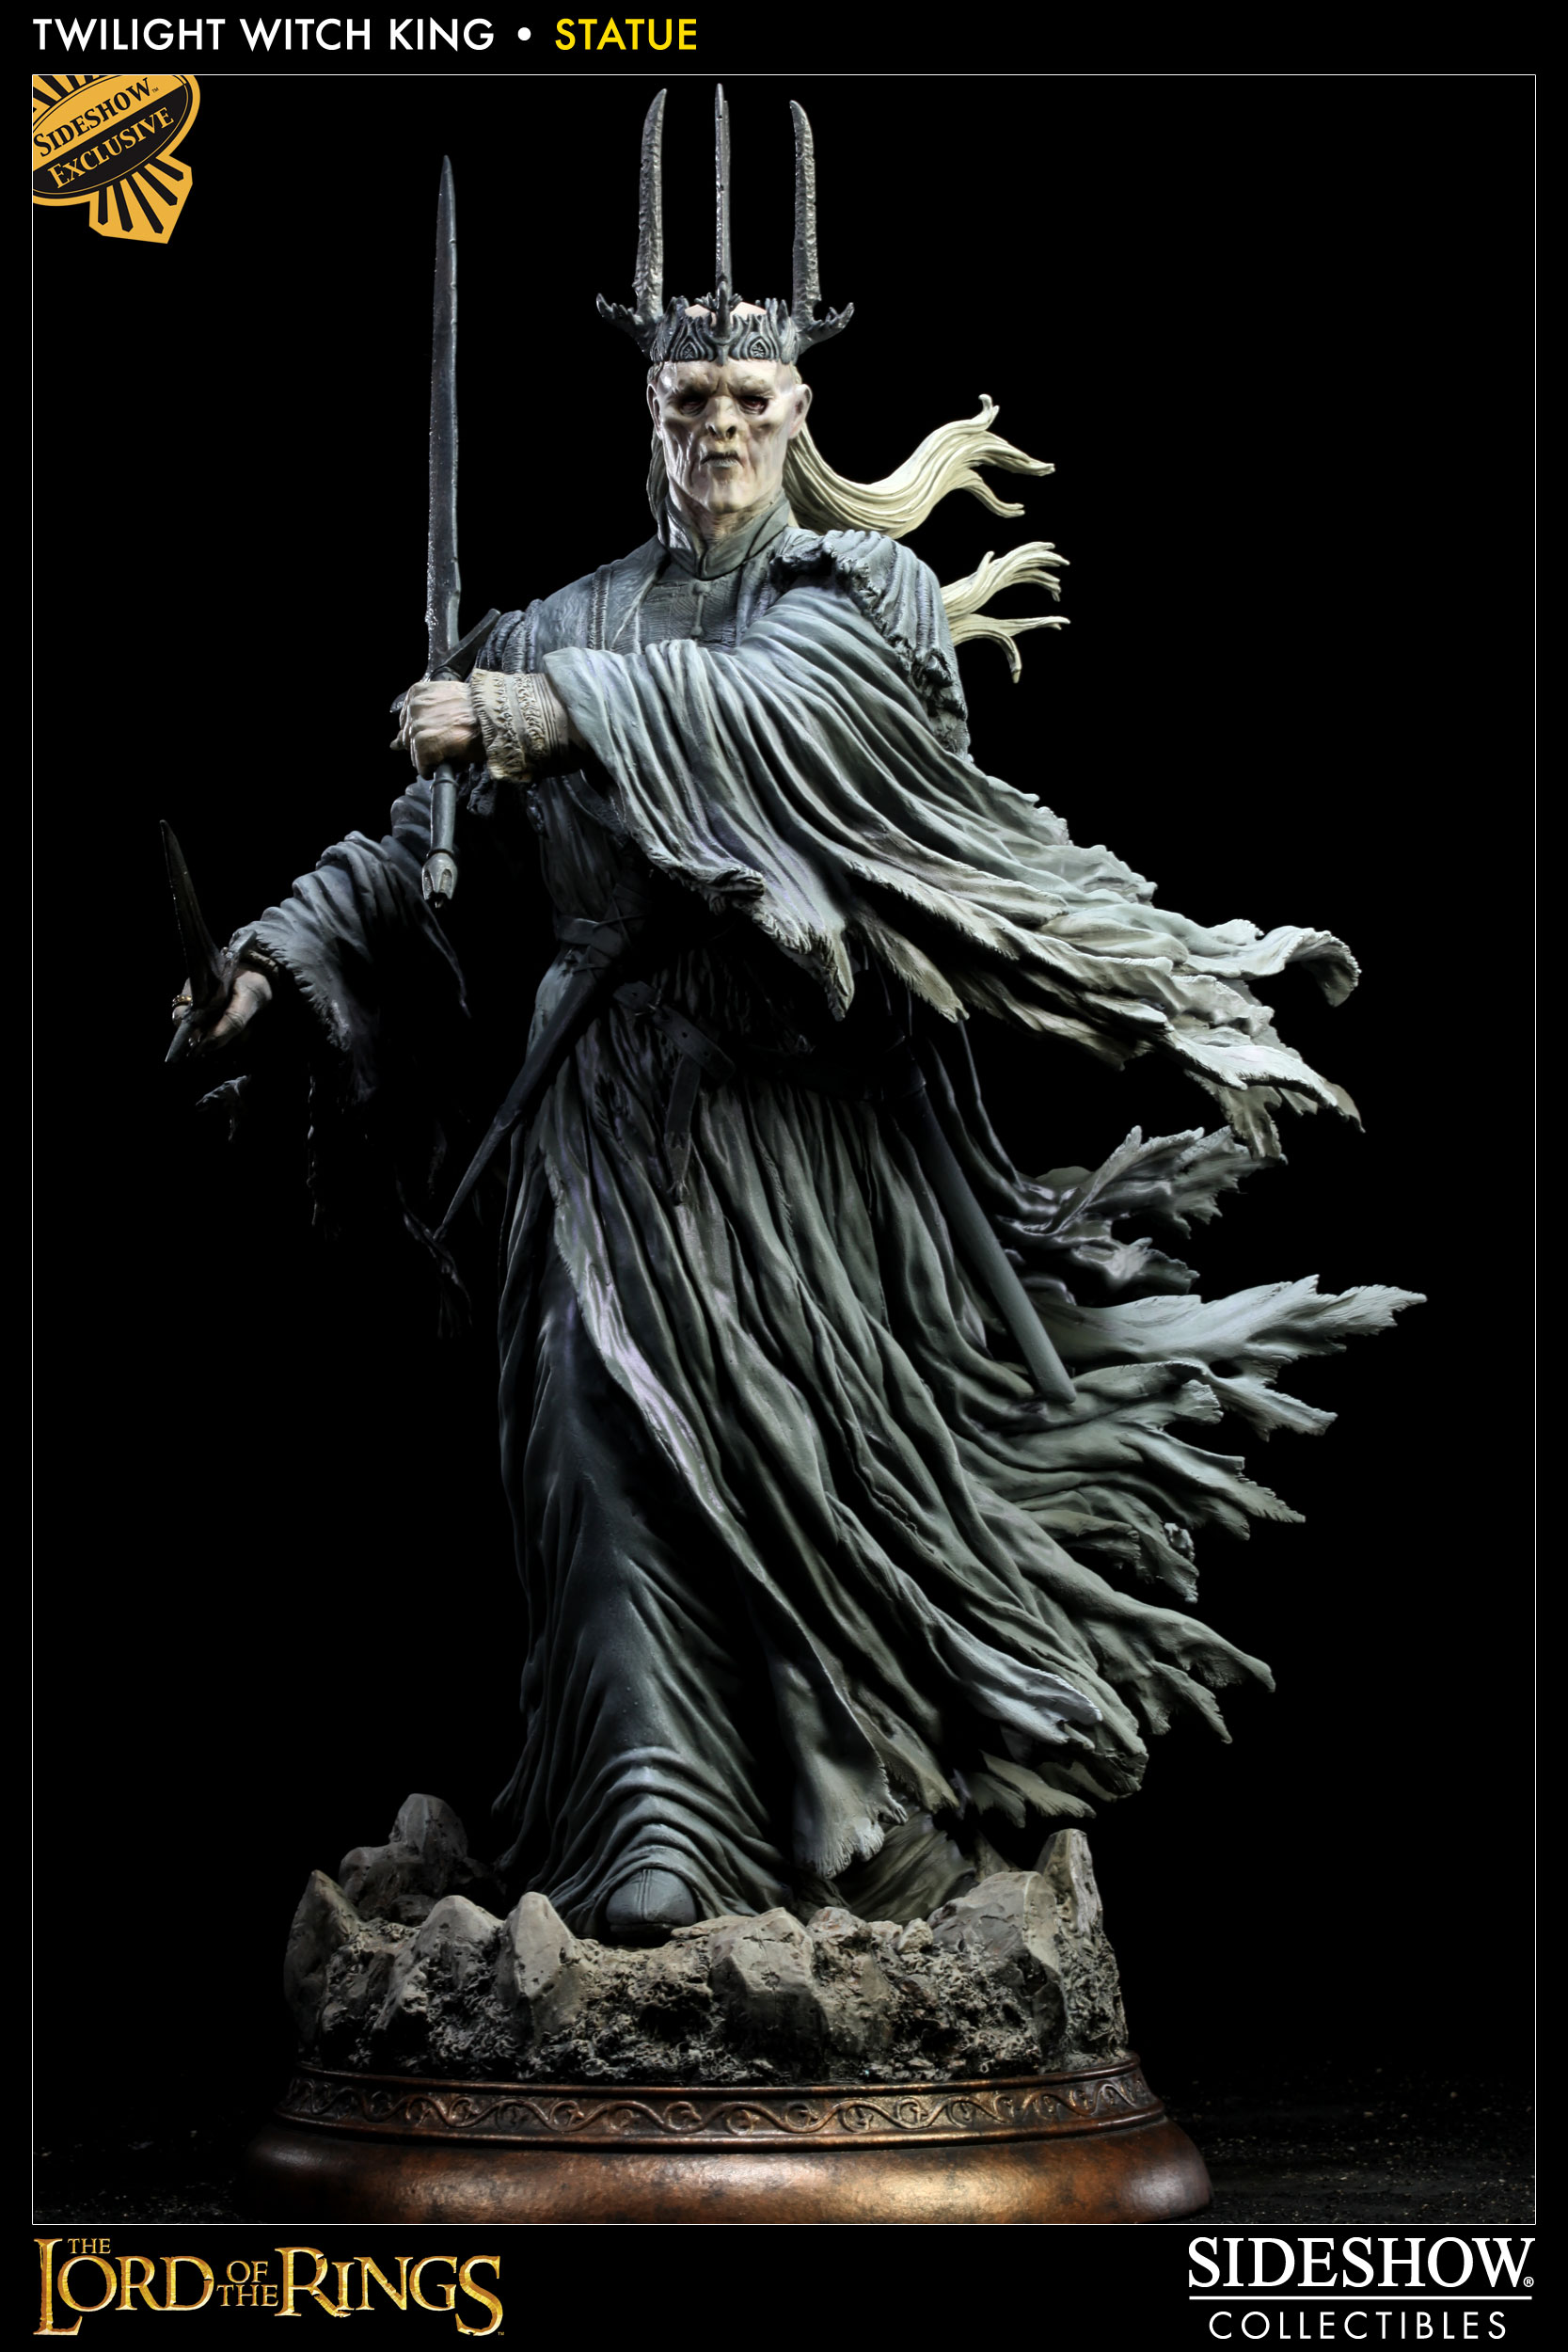 Collecting The Precious Sideshow Collectibles Twilight WitchKing